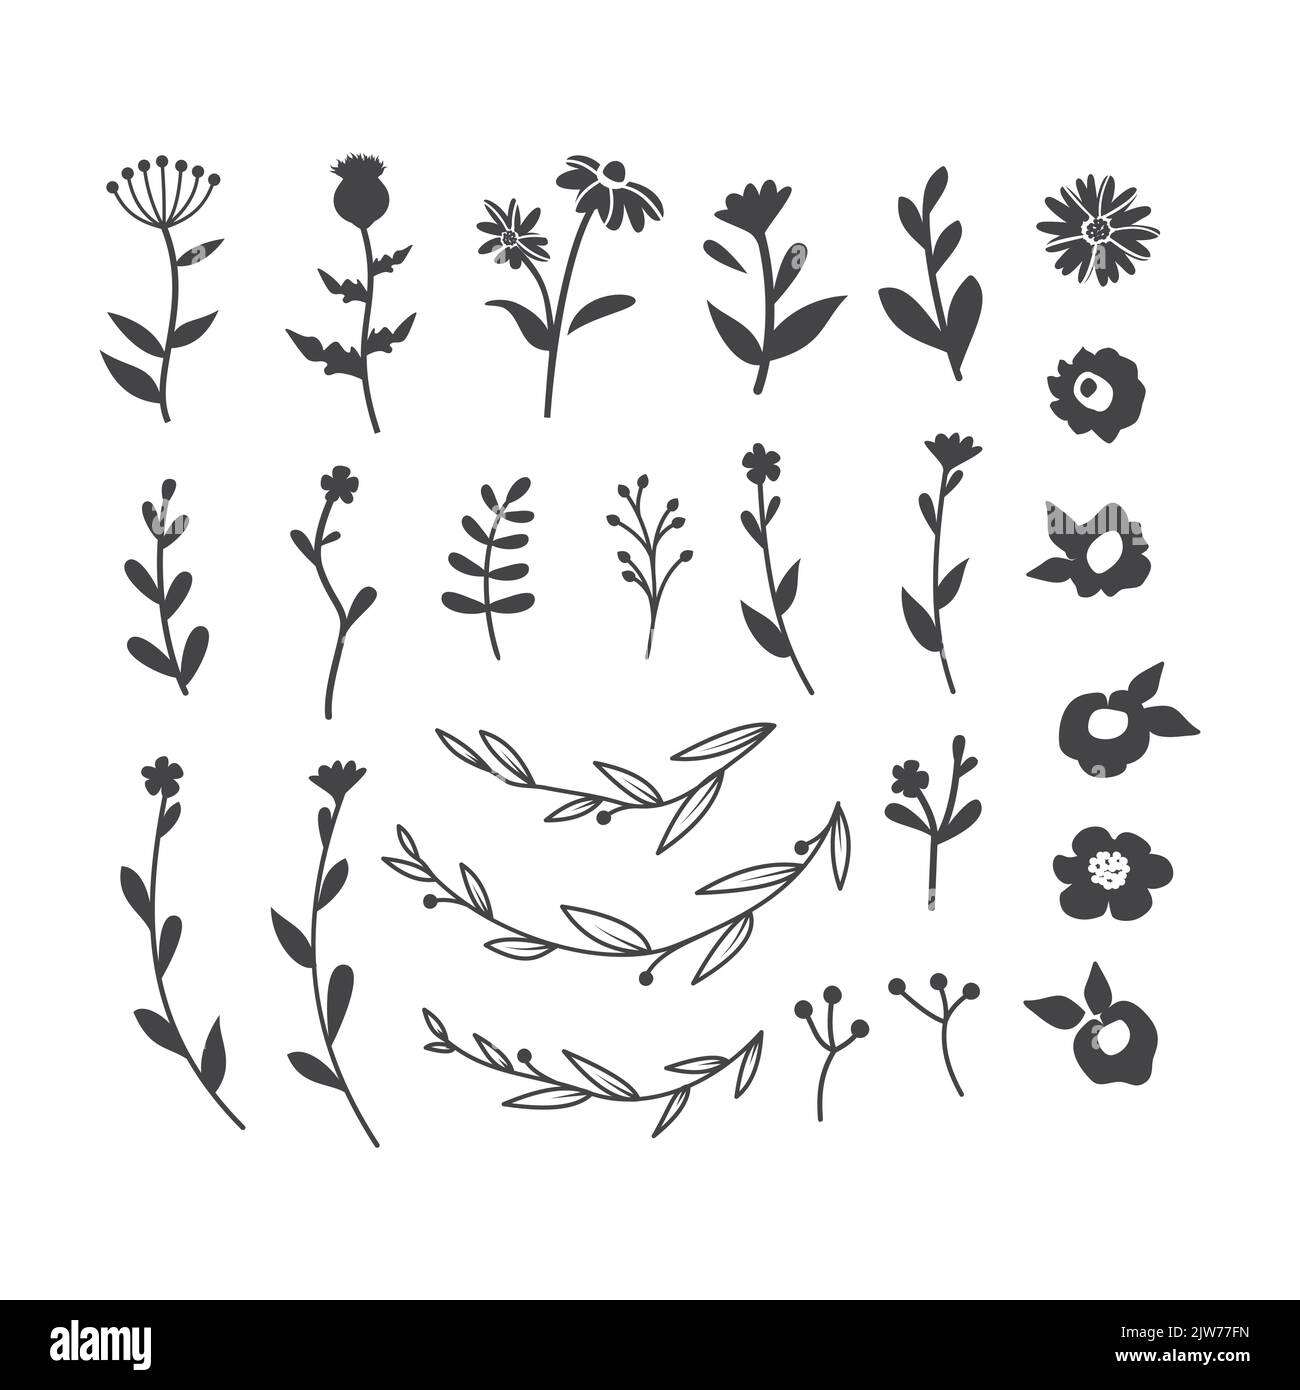 Flowers and branches silhouette vector set. Floral hand drawn decorations. Flower black icon. Stock Vector